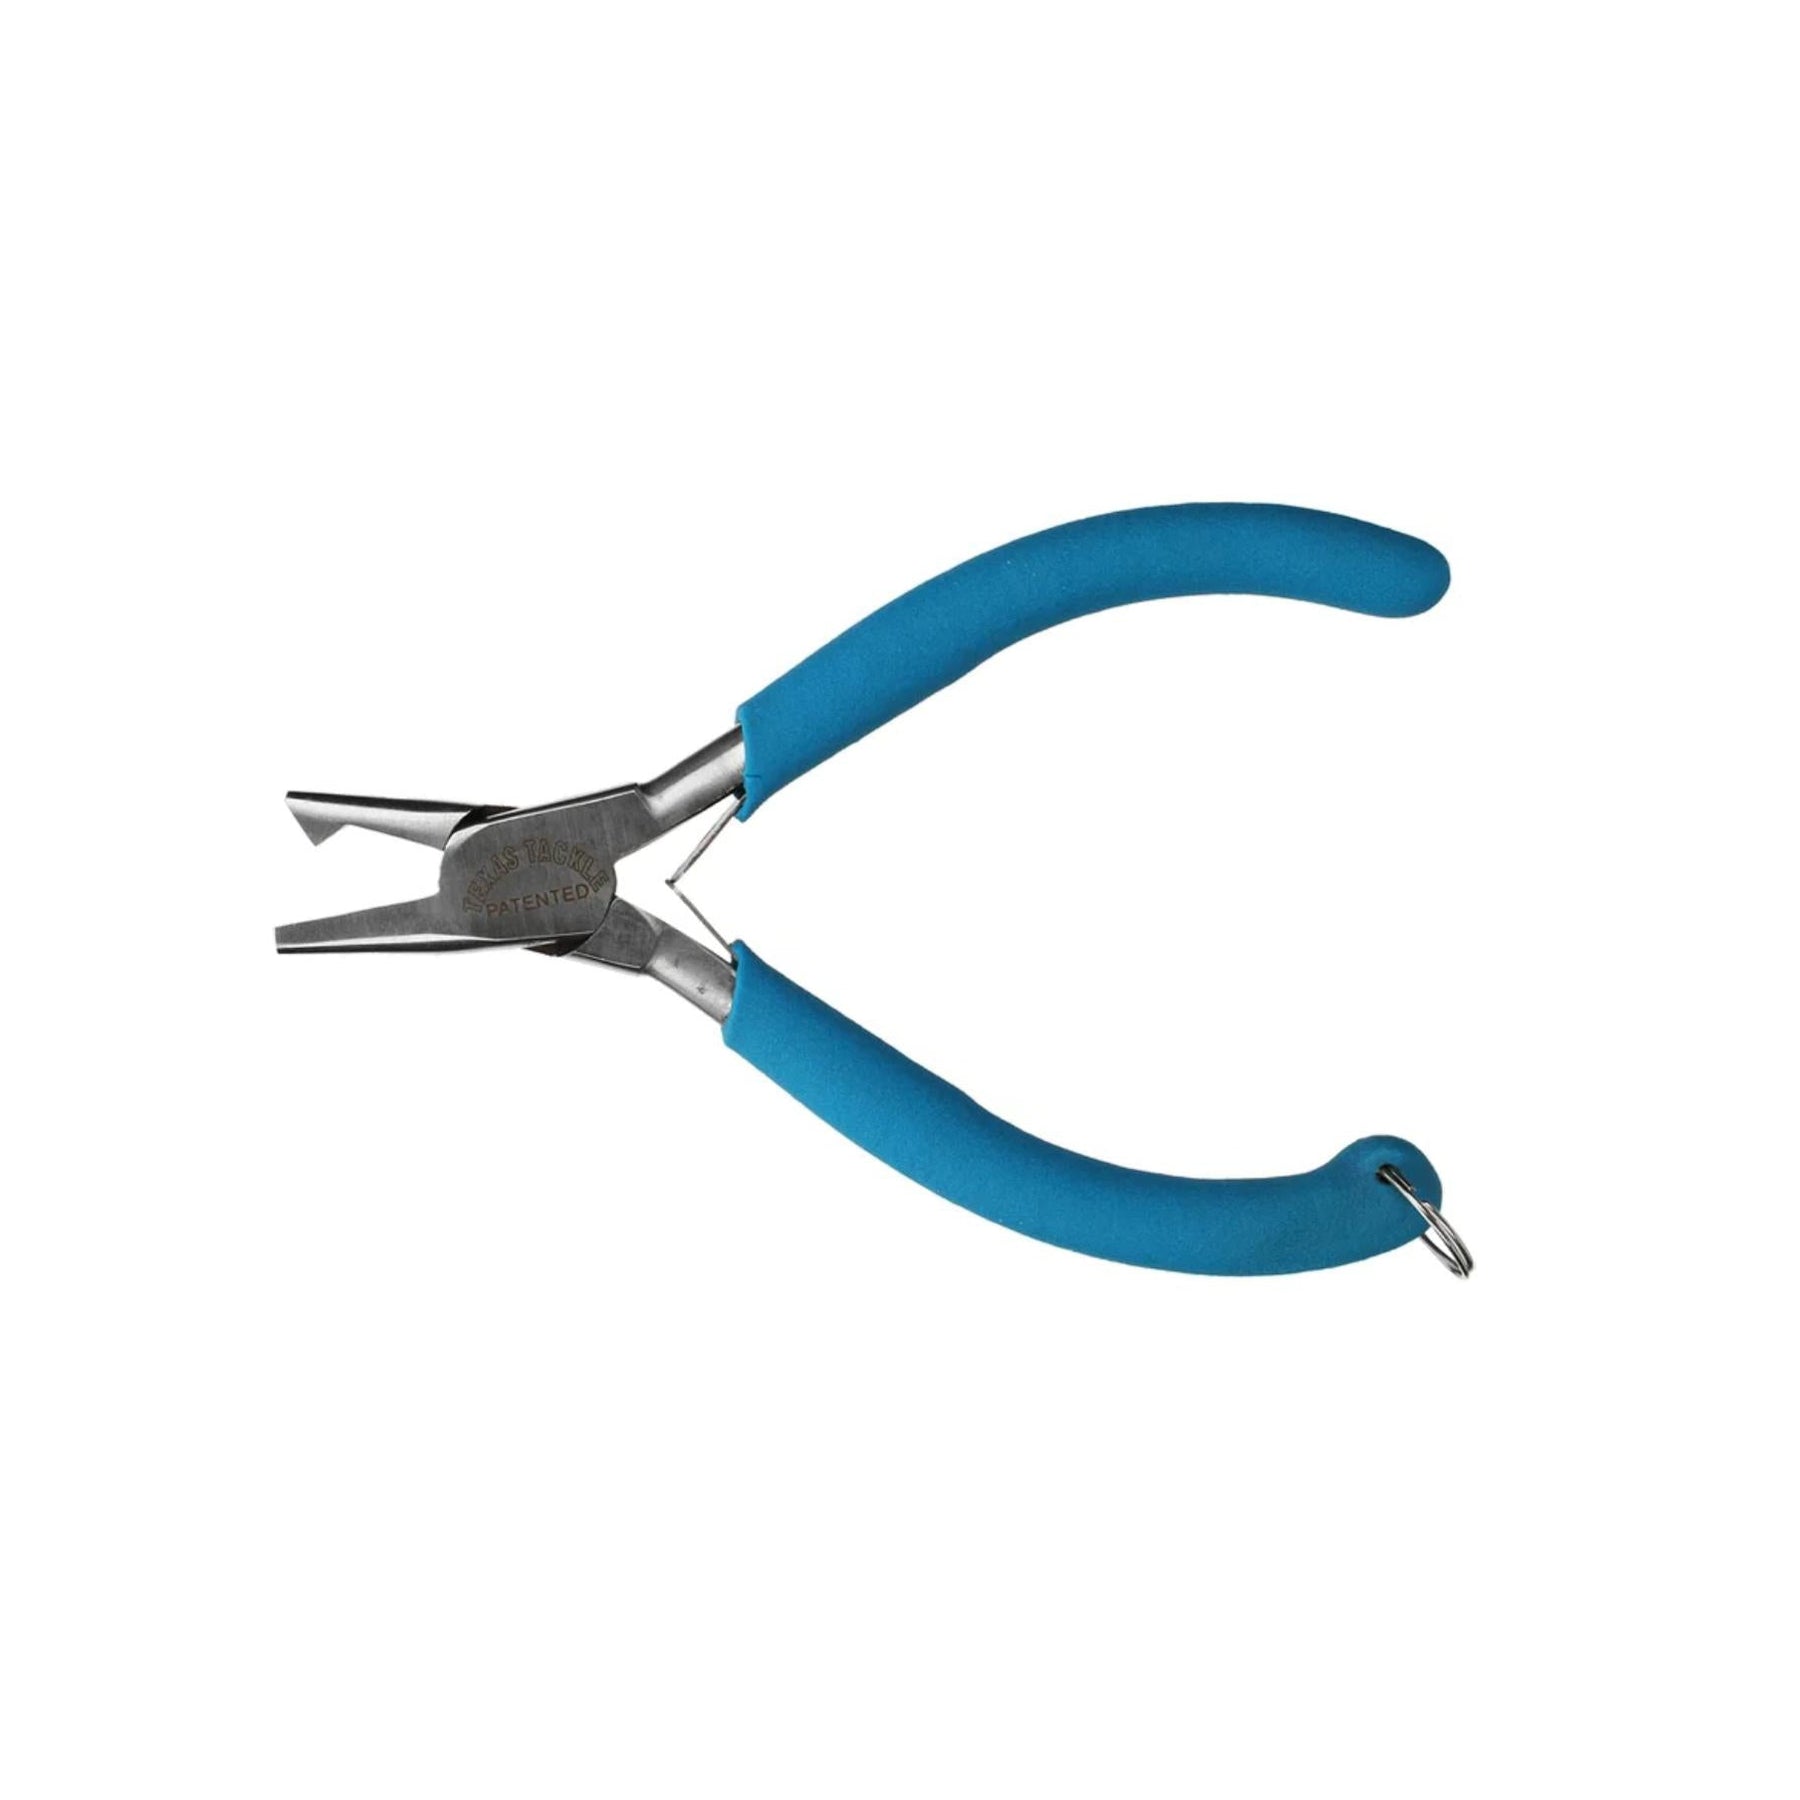 Texas Tackle Split-Ring Pryers/Pliers